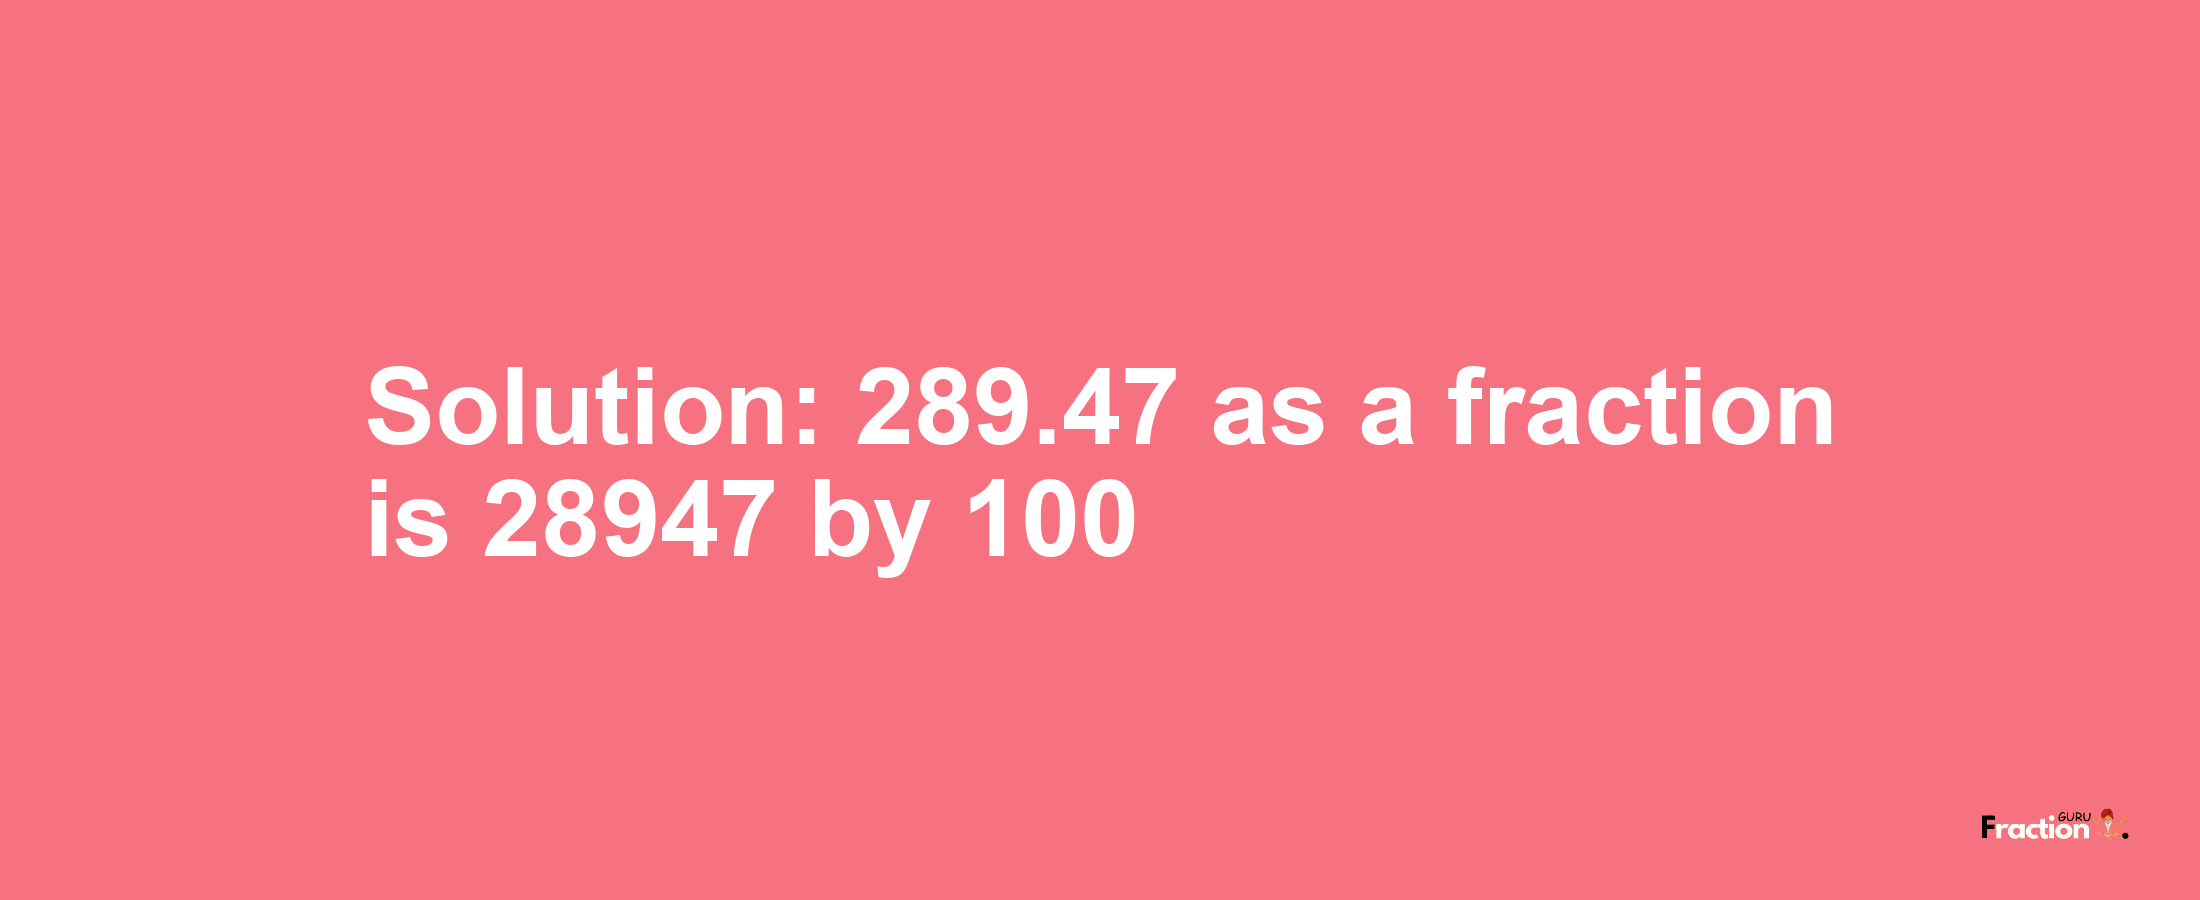 Solution:289.47 as a fraction is 28947/100